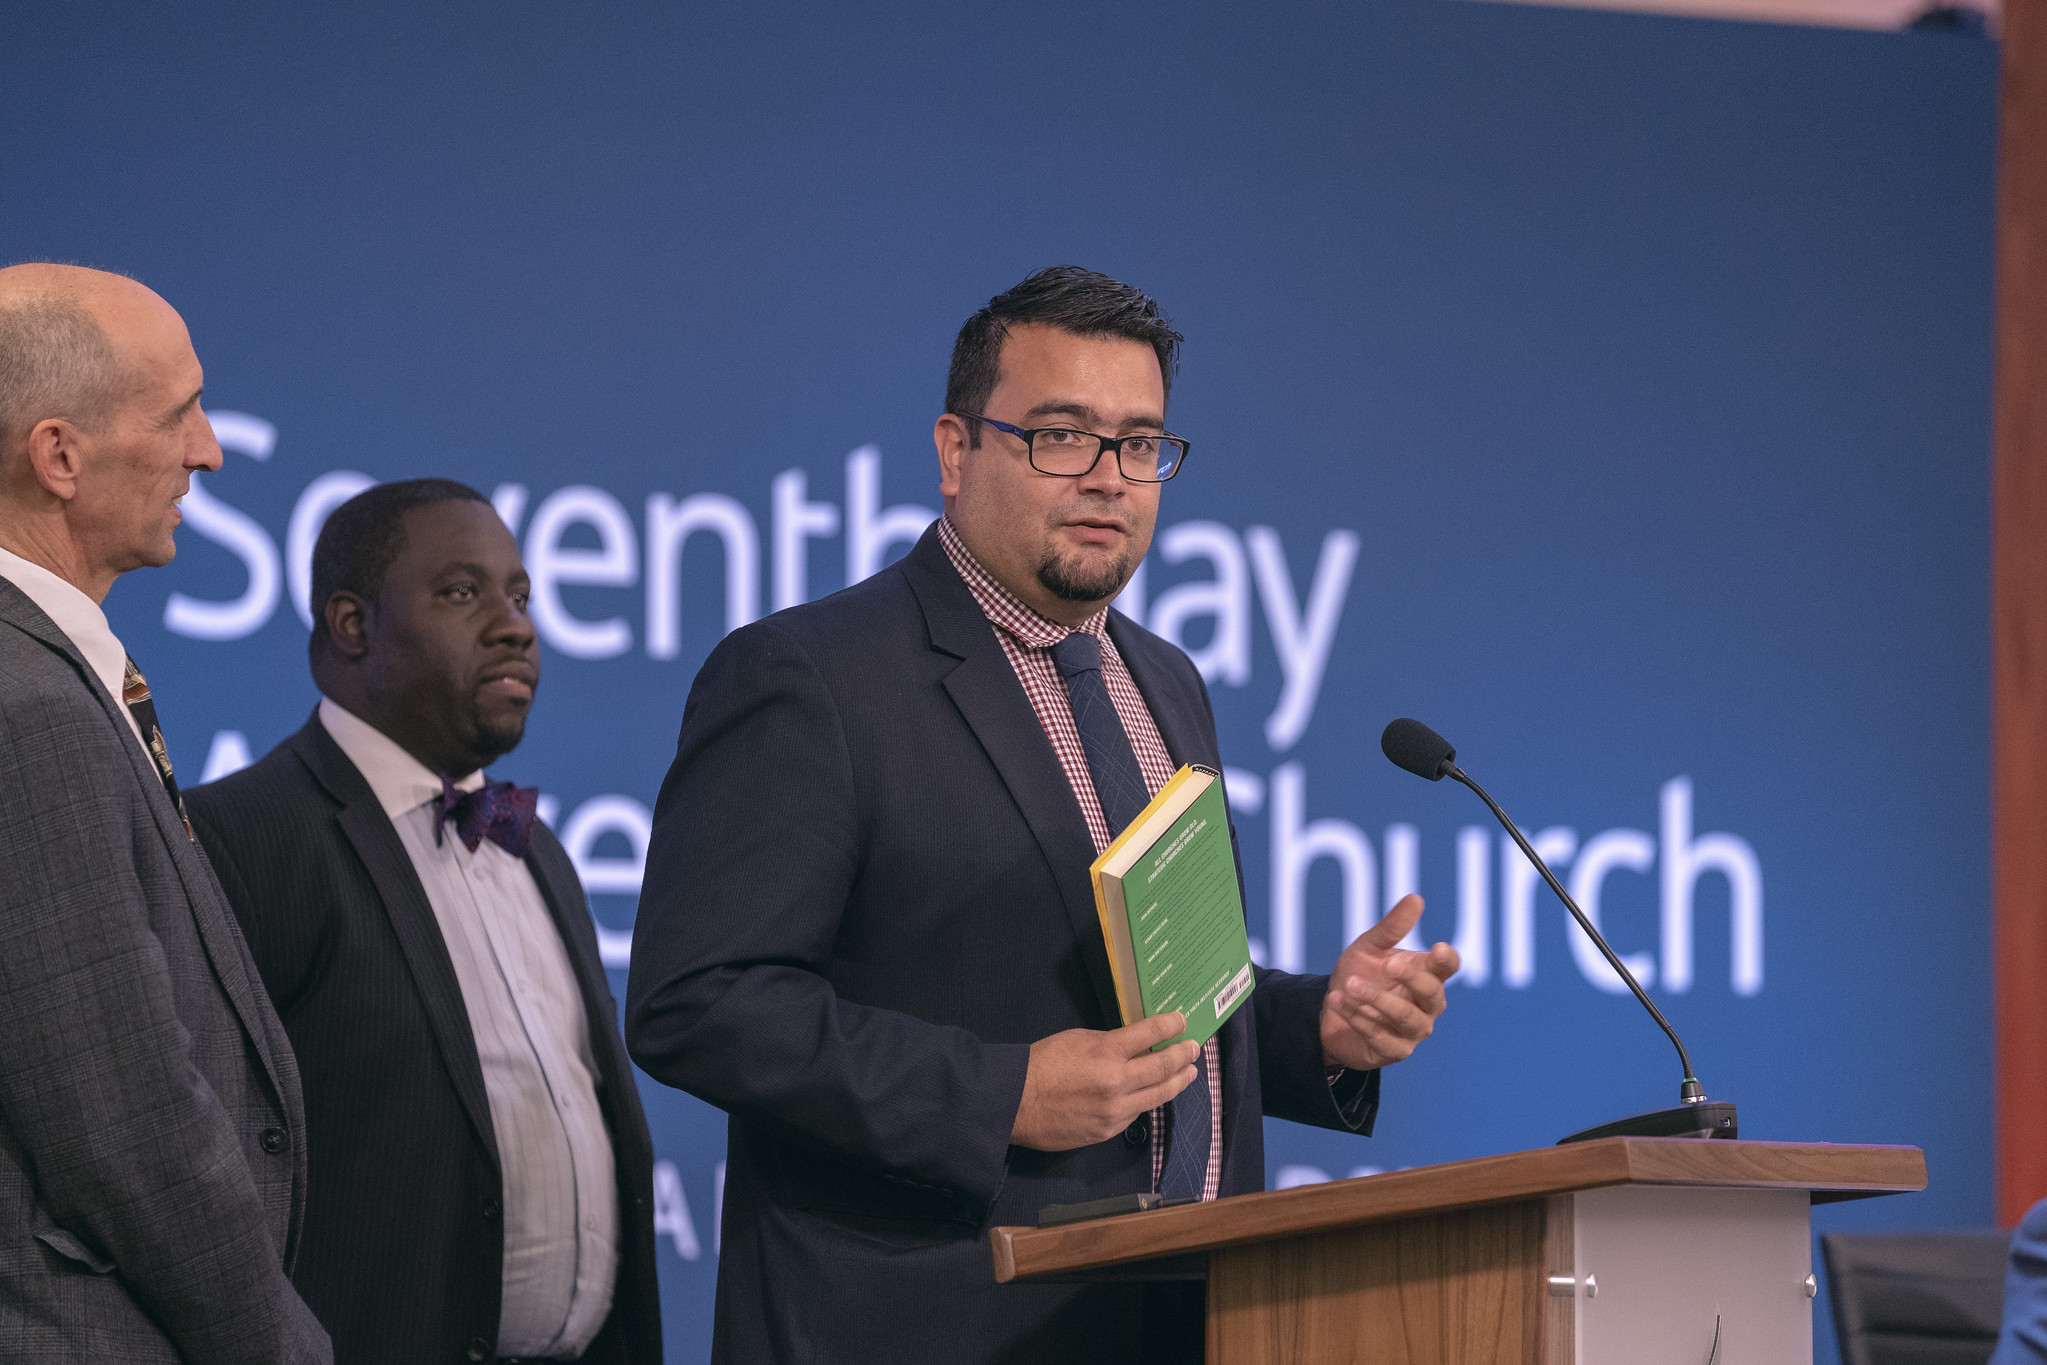 Armando Miranda, Youth and Young Adult Ministries associate director, highlights materials for young adults and ministry, including the Growing Young resource book. Photo by Dan Weber